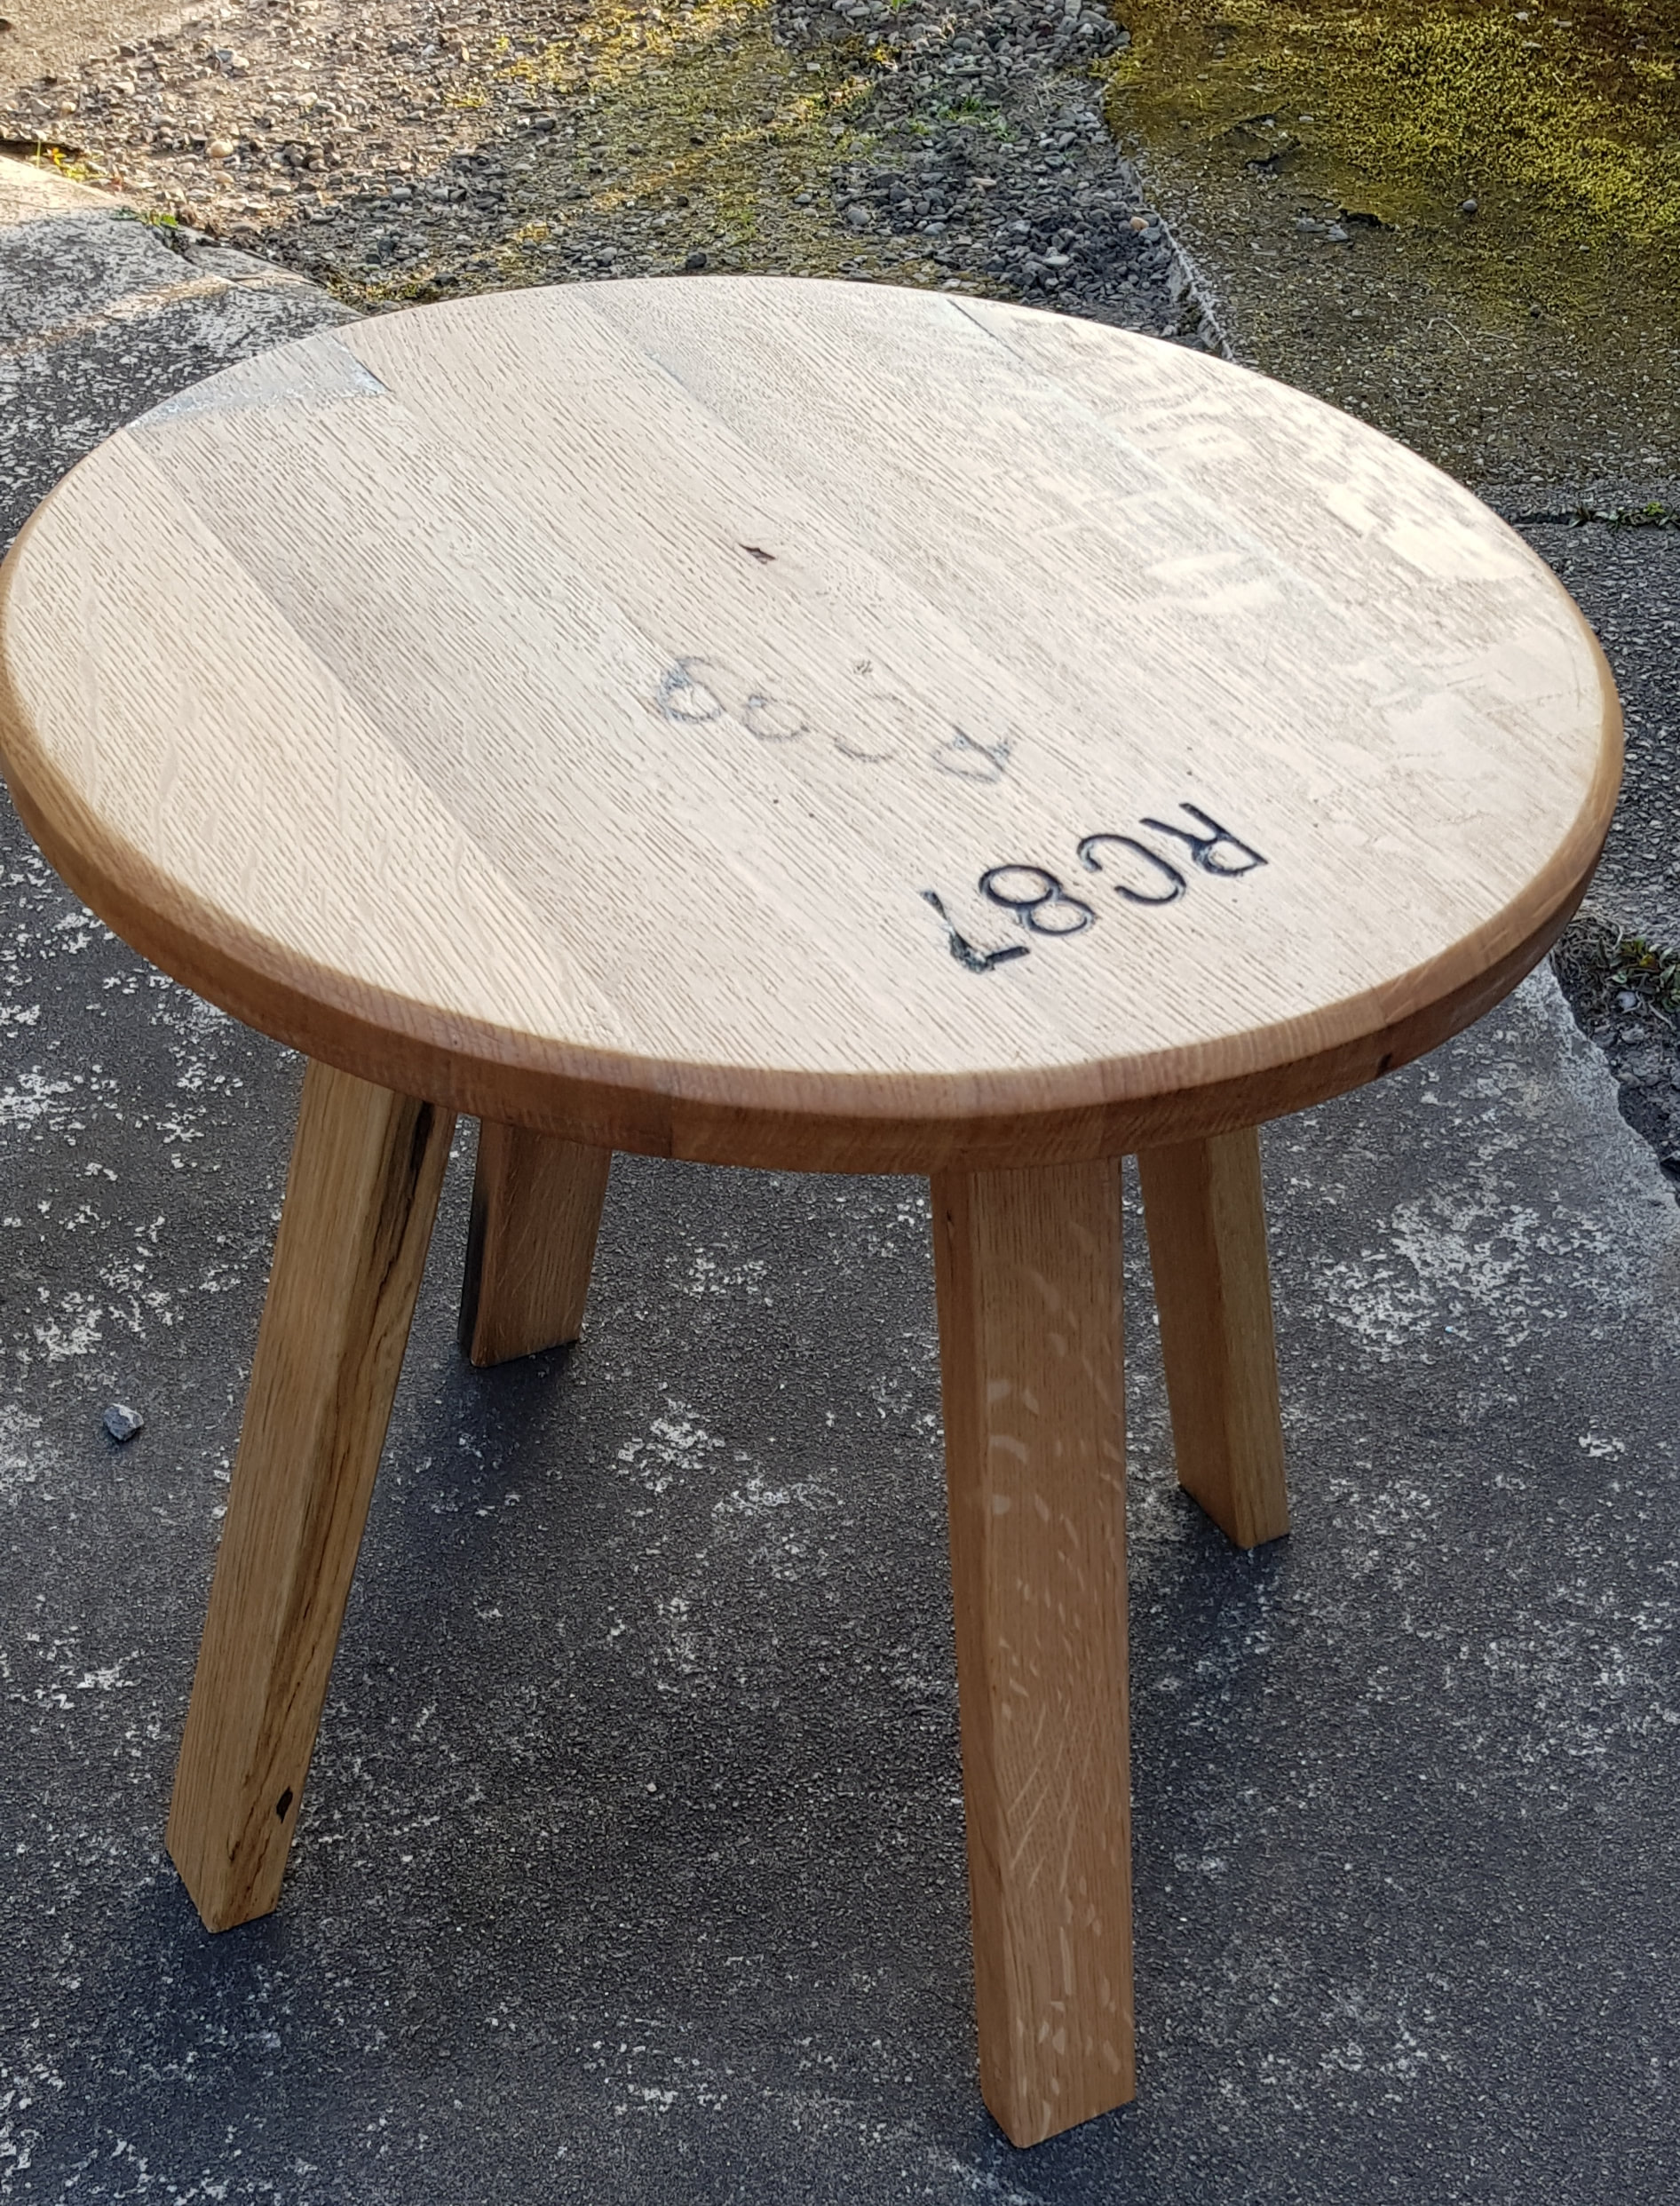 Whisky Barrel Side Table With Cooperage Markings